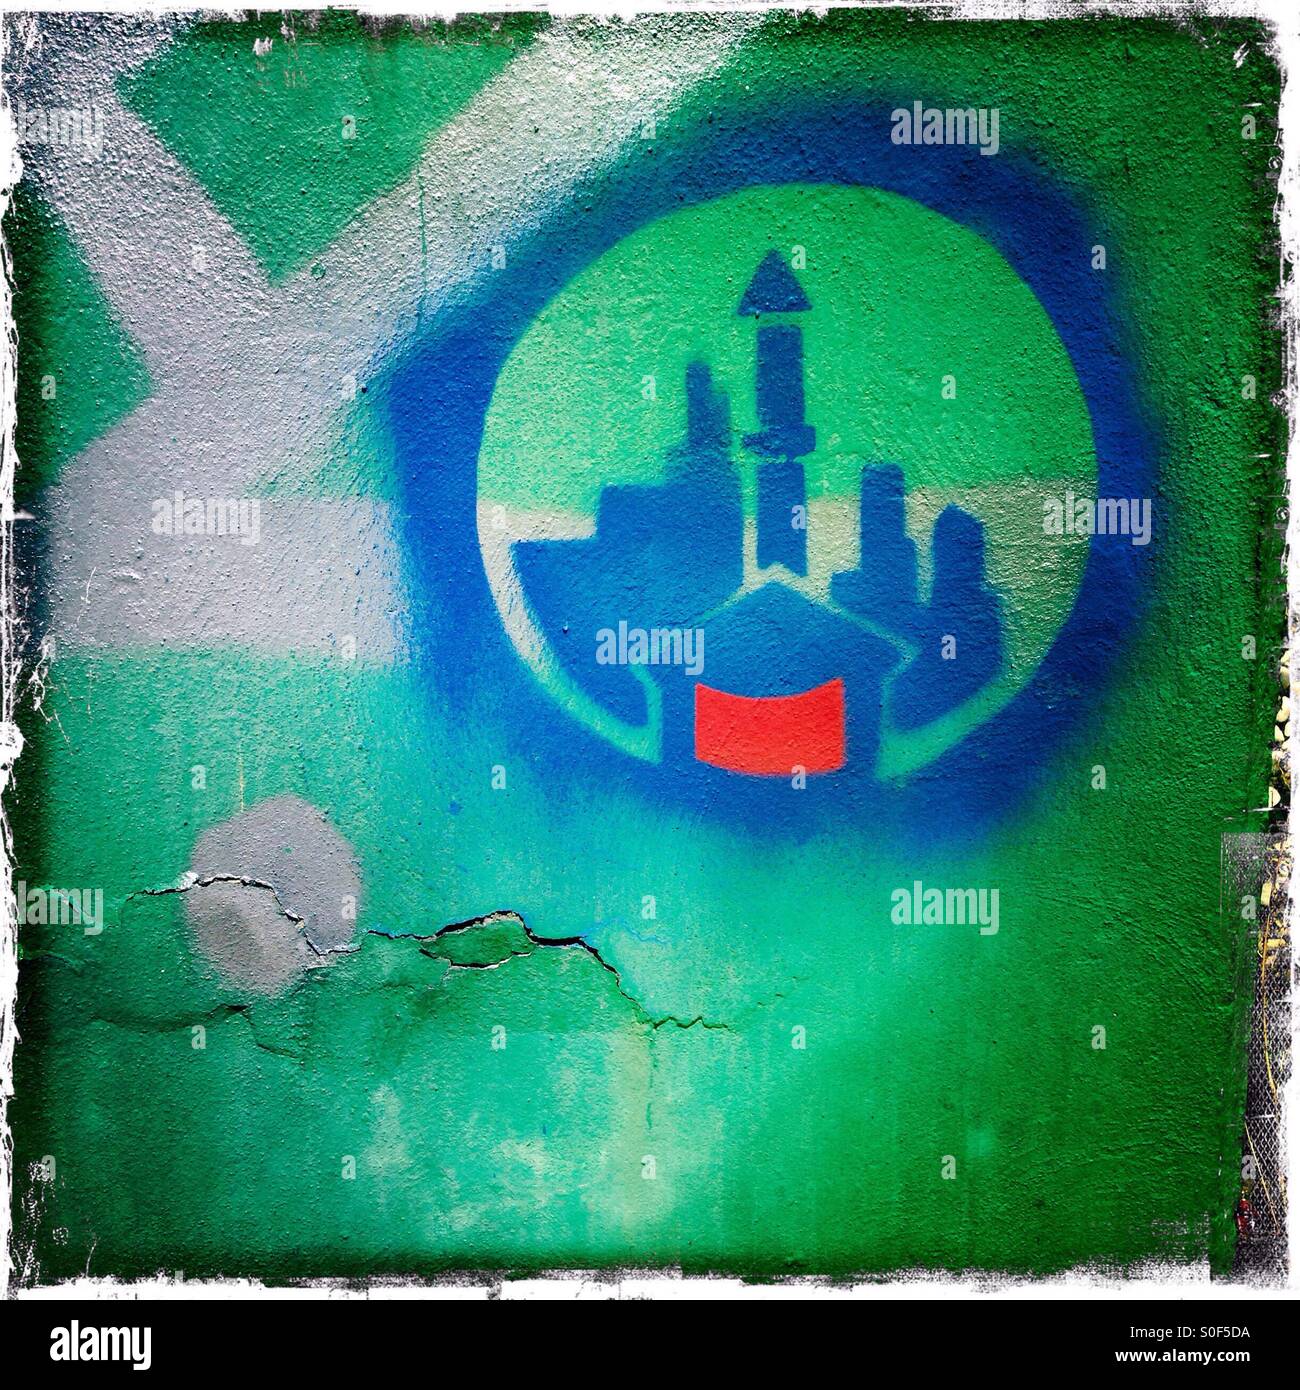 Stencil Graffiti on a wall in Berlin of a Mosque with Minaret dominating the Skyline of a City Stock Photo